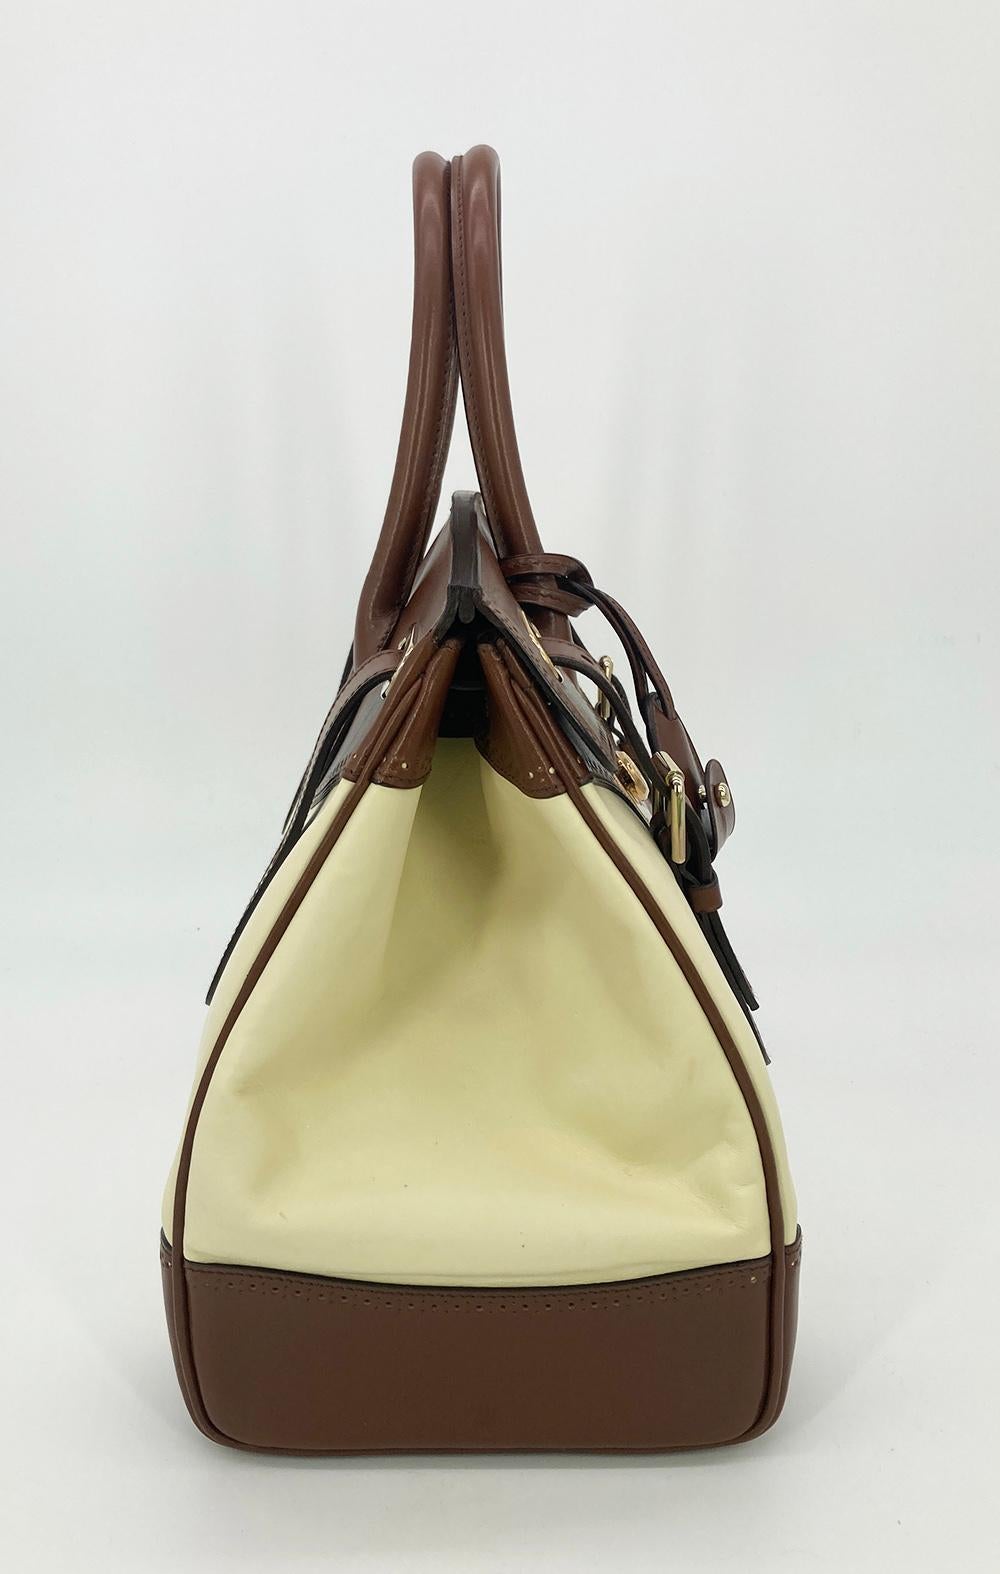 Ralph Lauren Cream and Brown Leather Rickey Bag in good condition. Cream leather body trimmed with brown leather and gold hardware. Signature rickey style with a front centered gold sliding latch lock and two buckles on either side. Double top